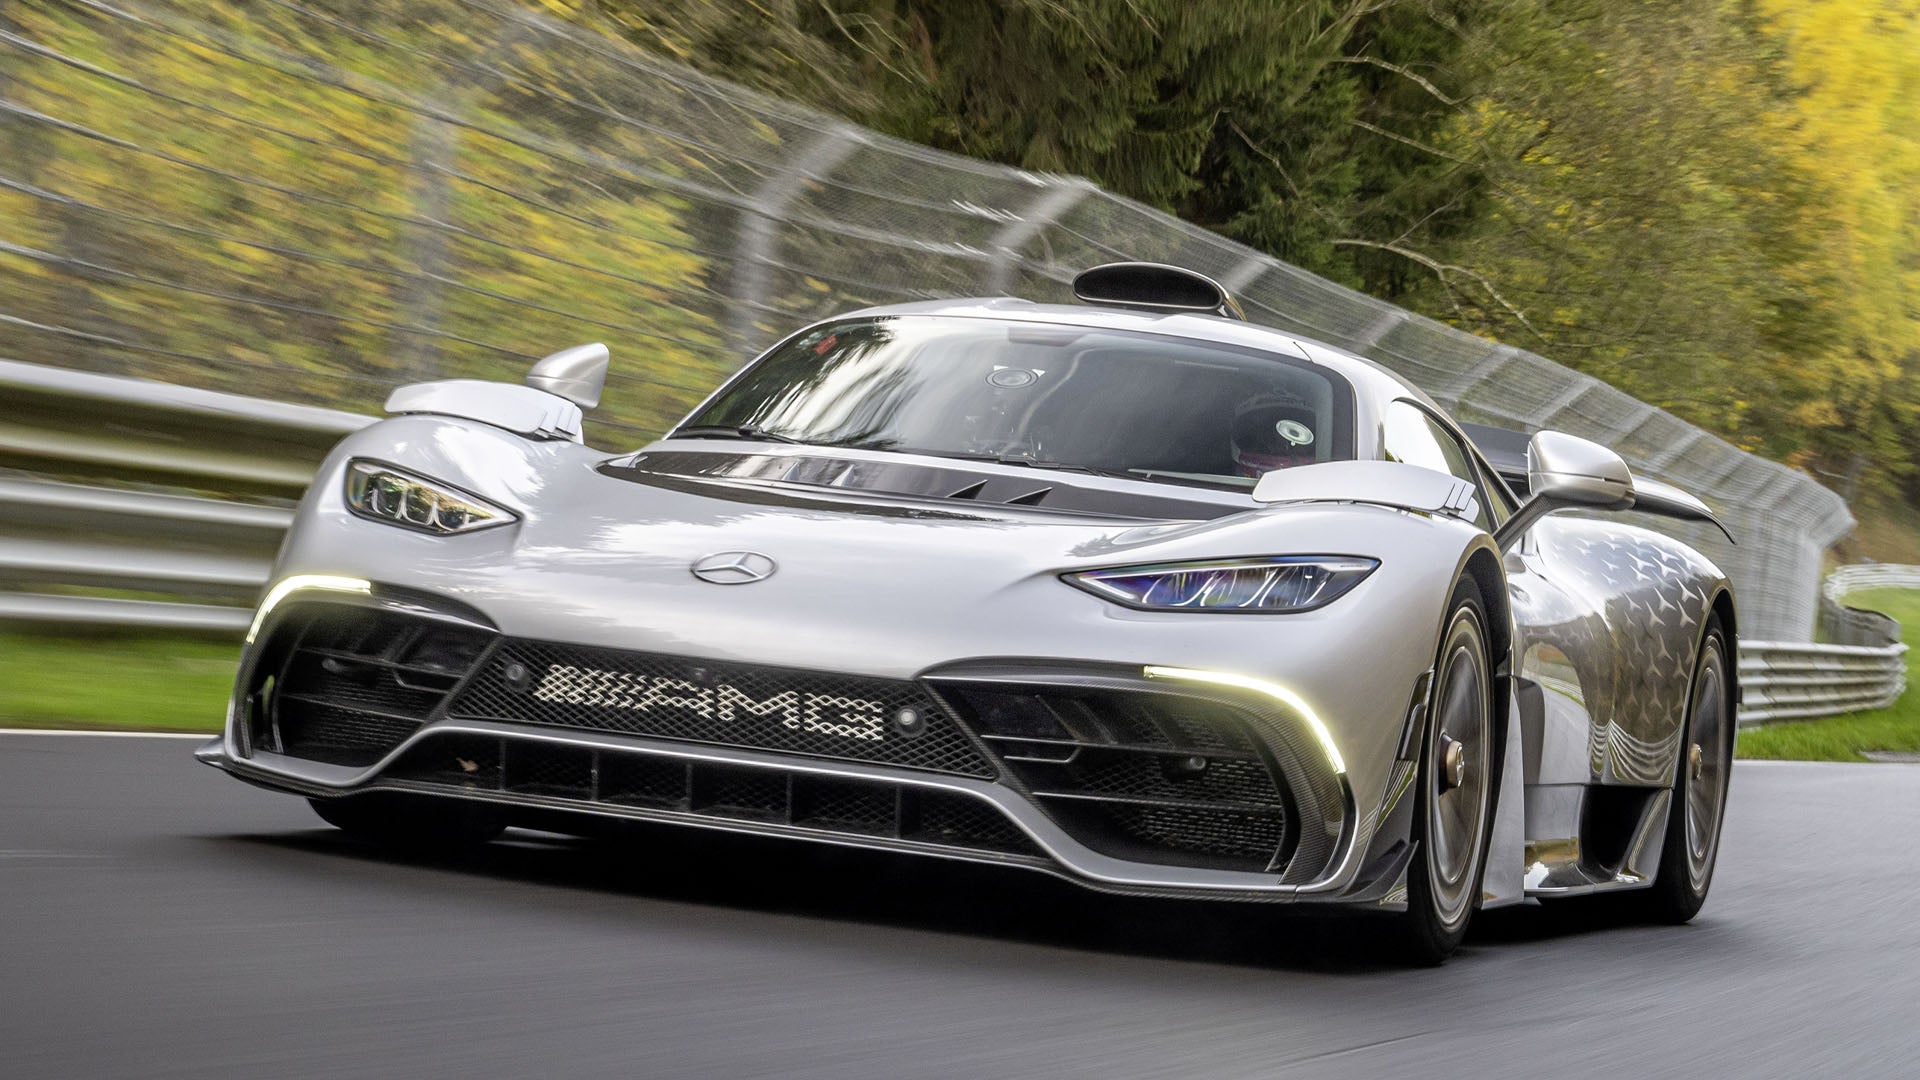 Mercedes-AMG One Hypercar Beats Porsche’s Nurburgring Lap Record by Nearly 8 Seconds